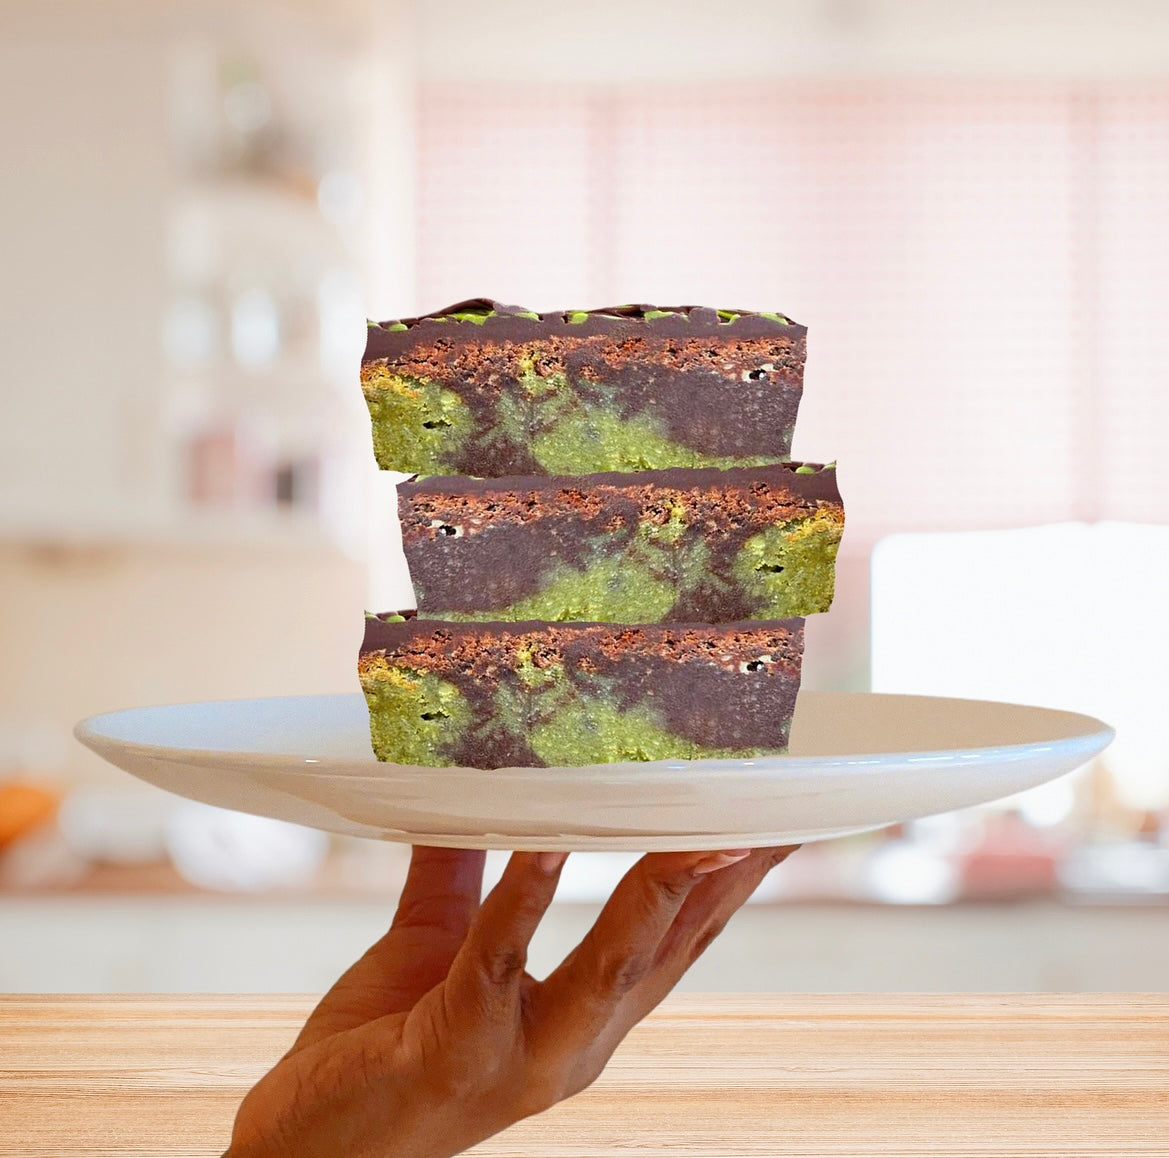 10 x DOUBLE DECKER MARBLED MATCHA & TRIPLE CHOCOLATE BROWNIES (free shipping)